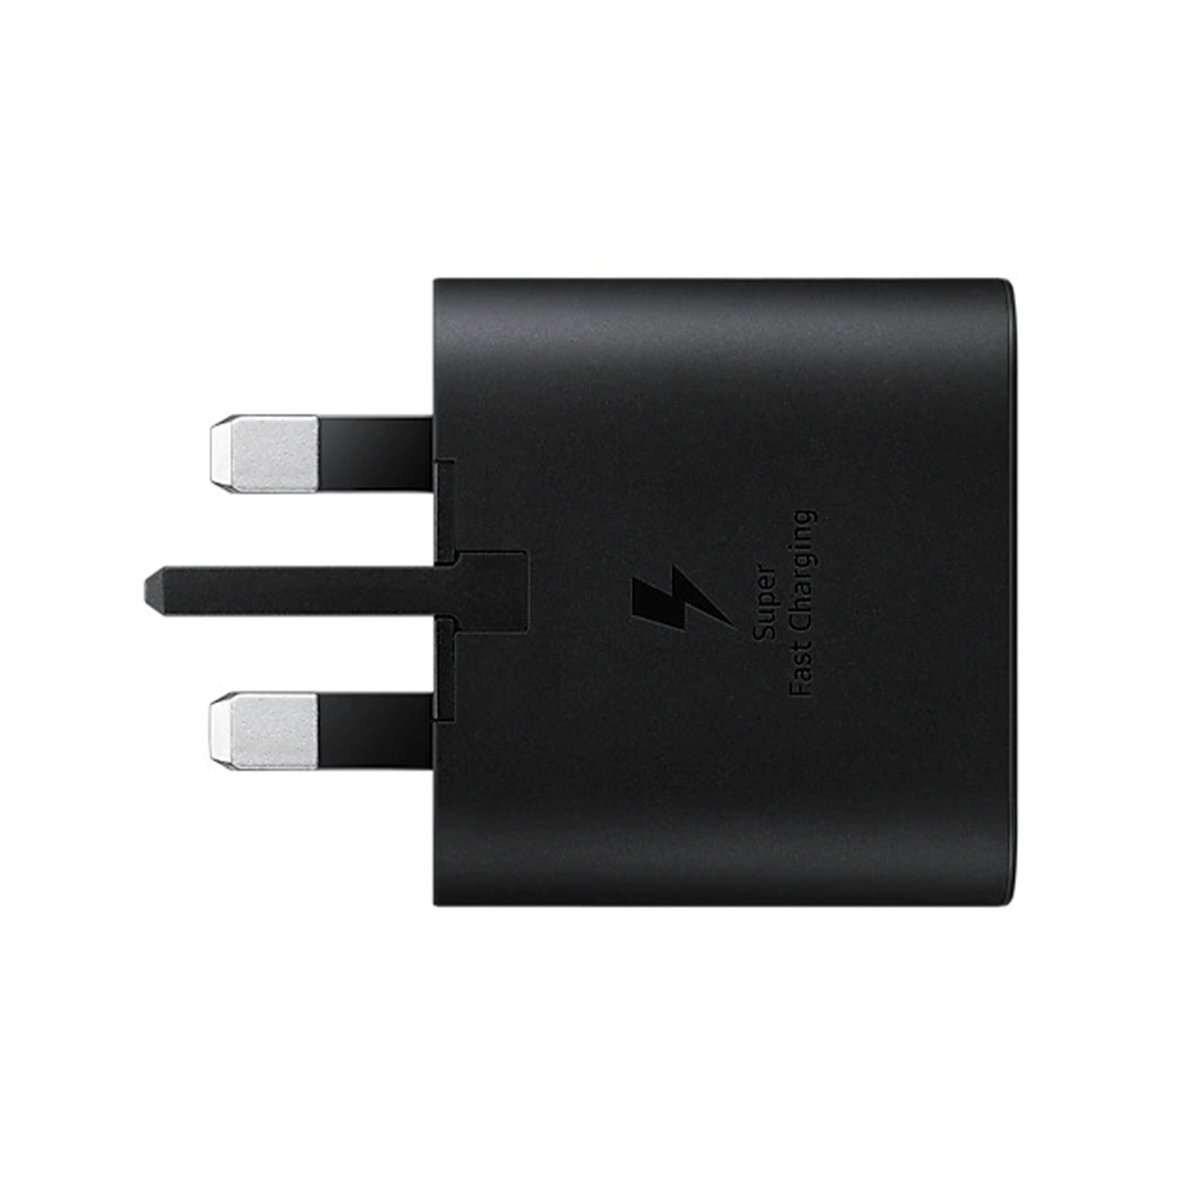 Samsung Wall Charger for Super Fast Charging (25W) EP-TA800 Black